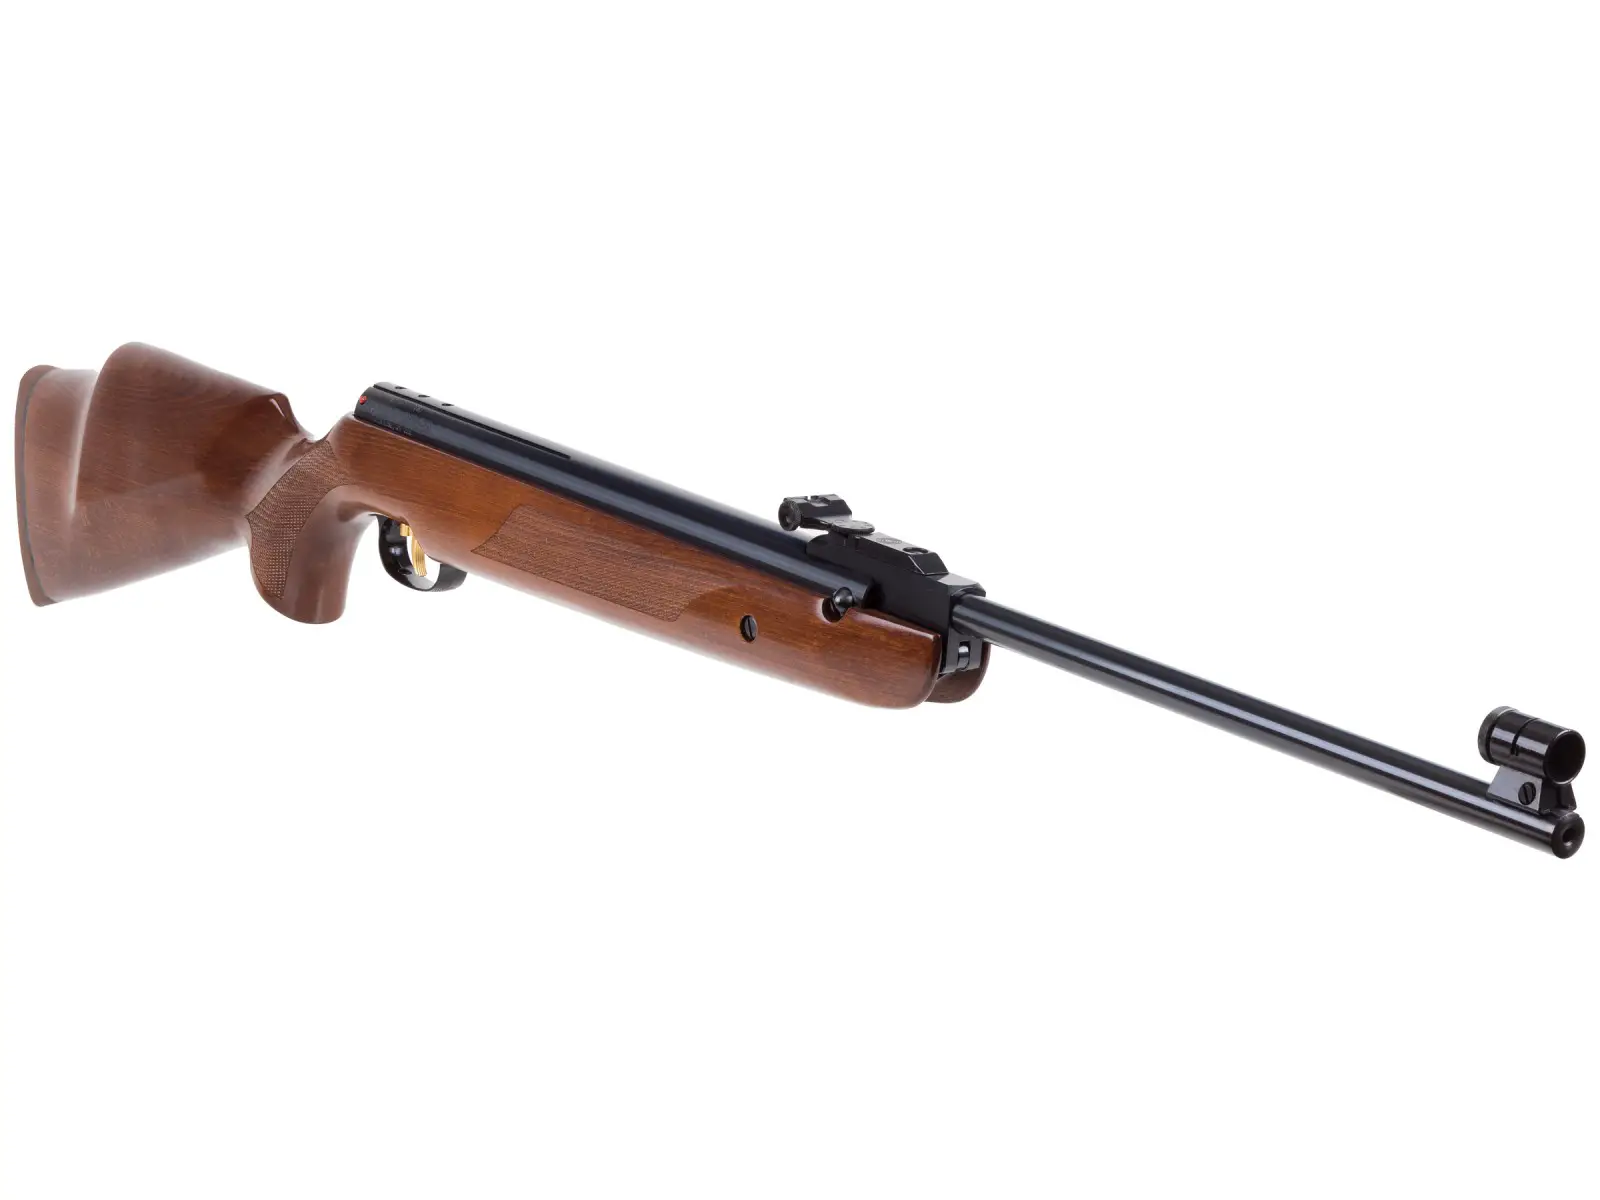 beemanr9 1 Best .22 Air Rifles - Top 11 fantastic guns for the money (Reviews and Buying Guide 2022)